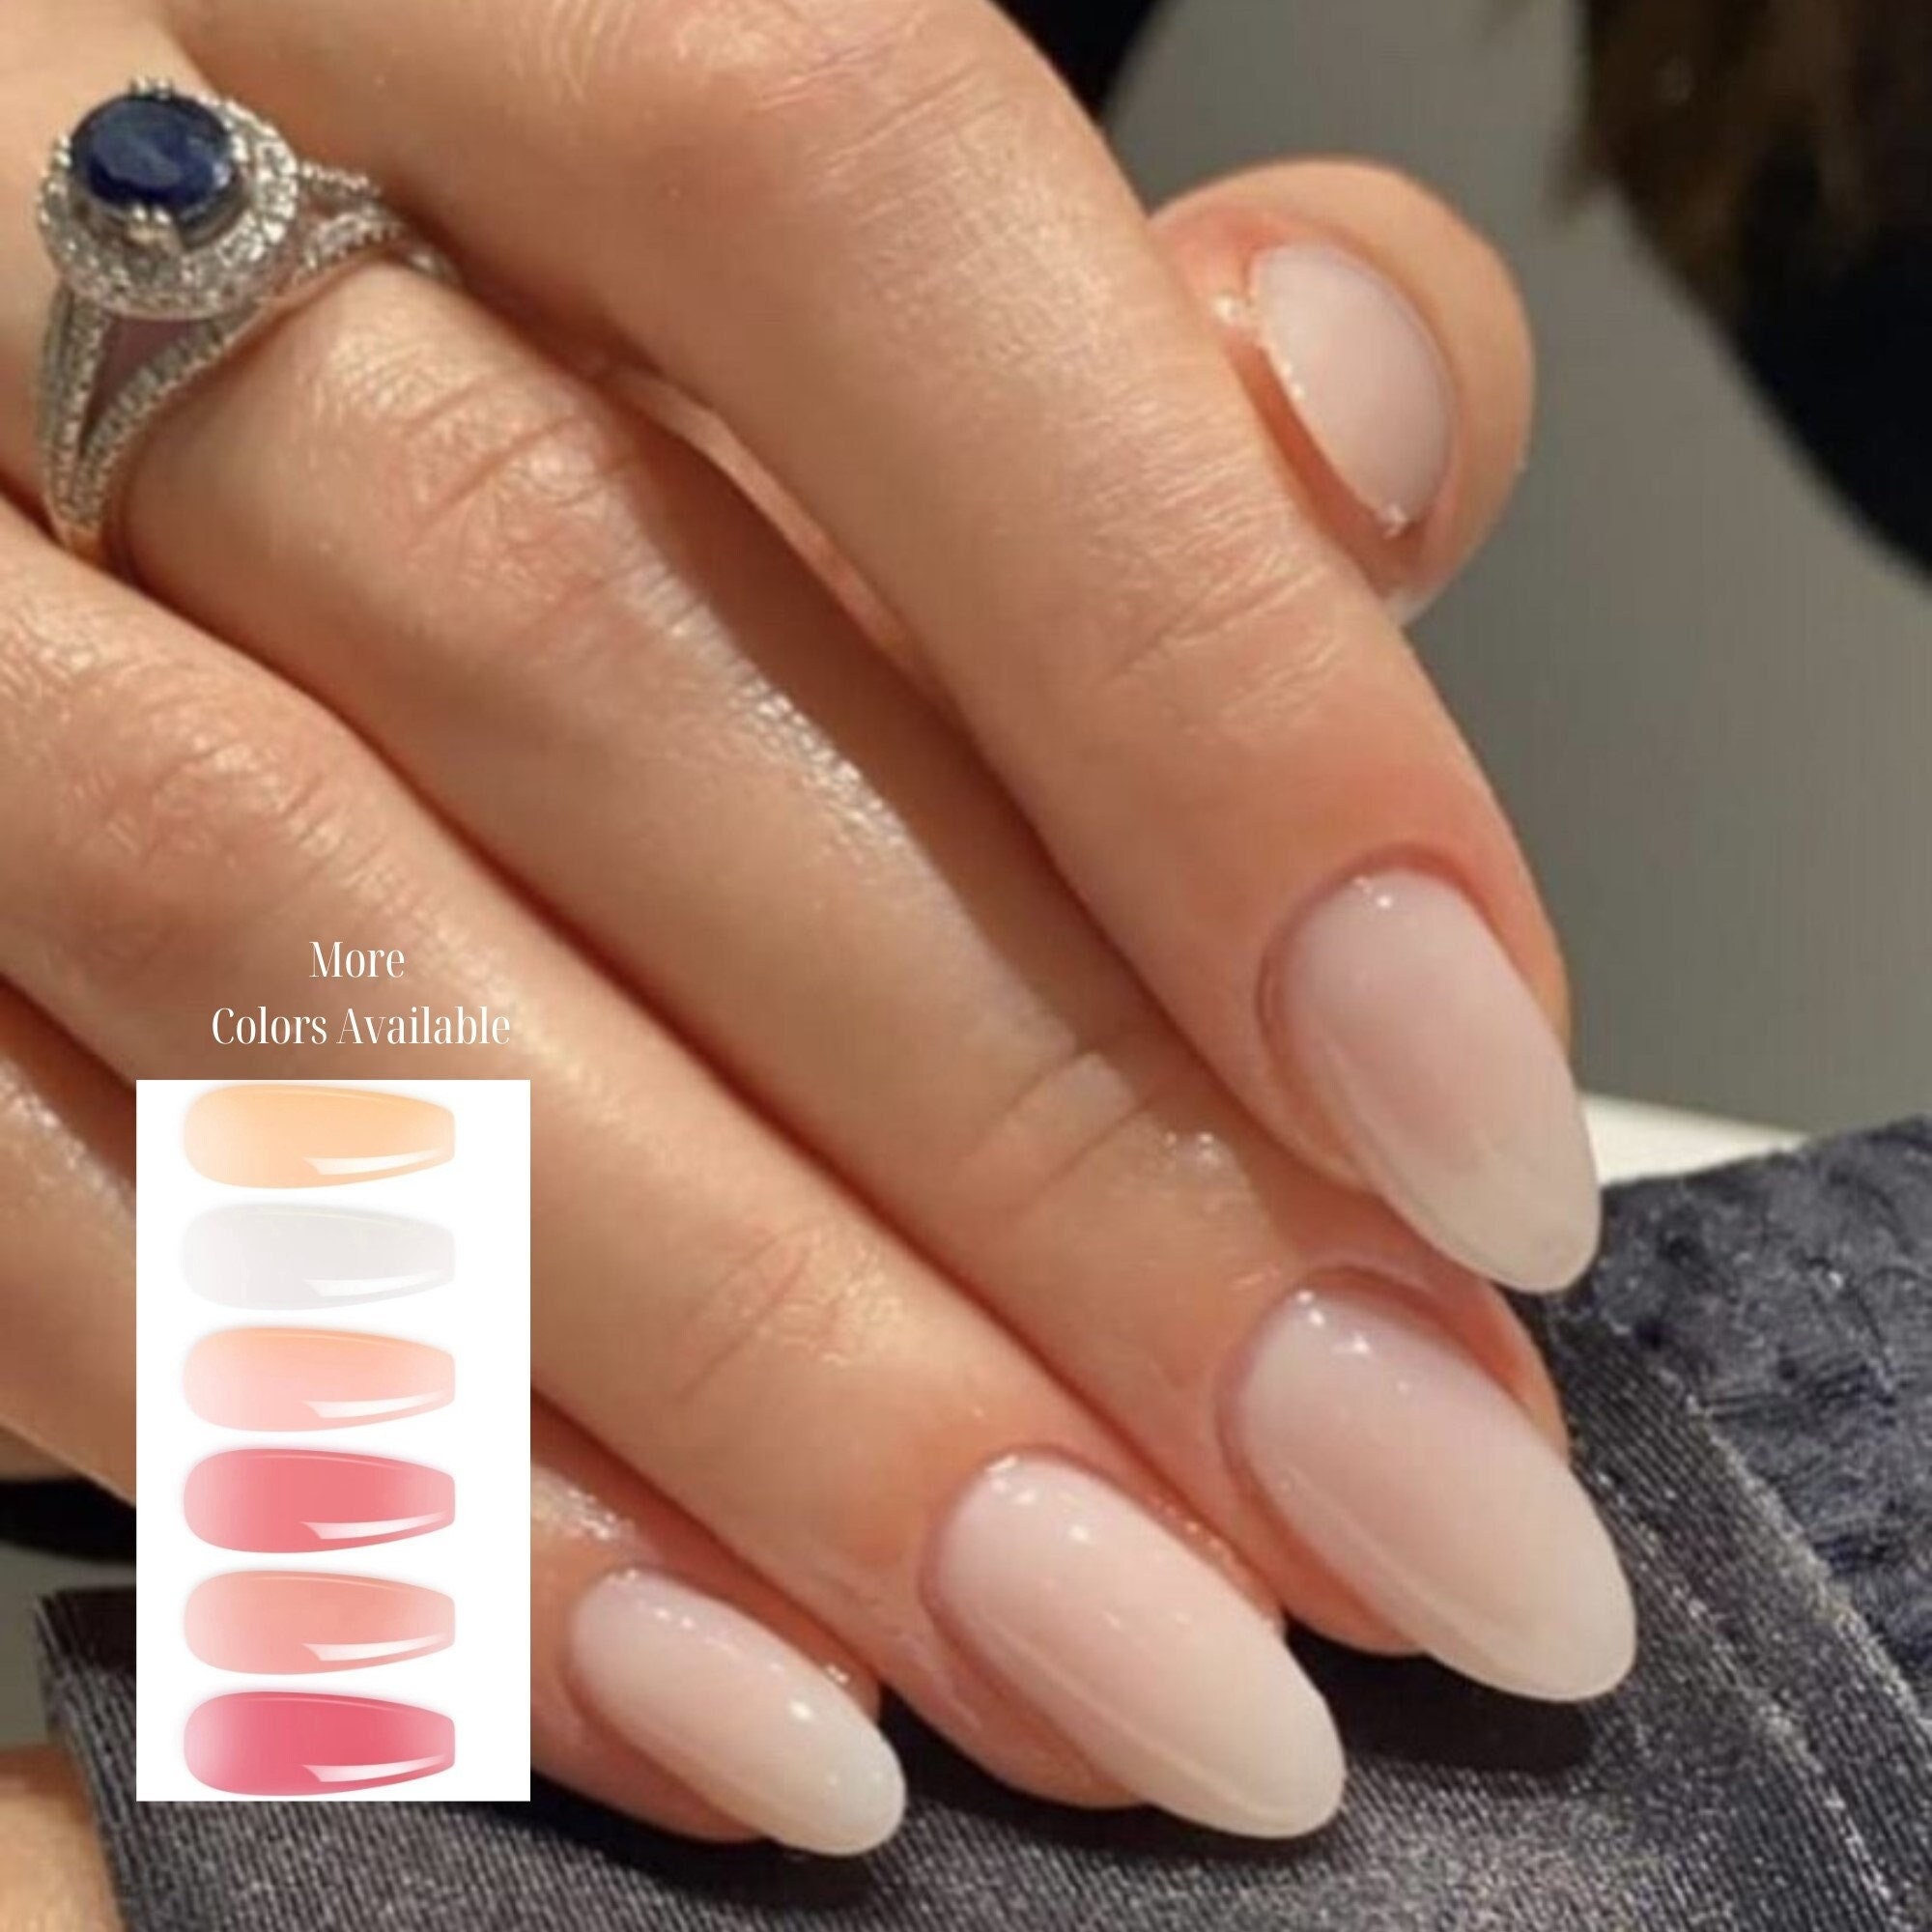 10 Almond Shape Nail Ideas for Your Next Manicure, nail